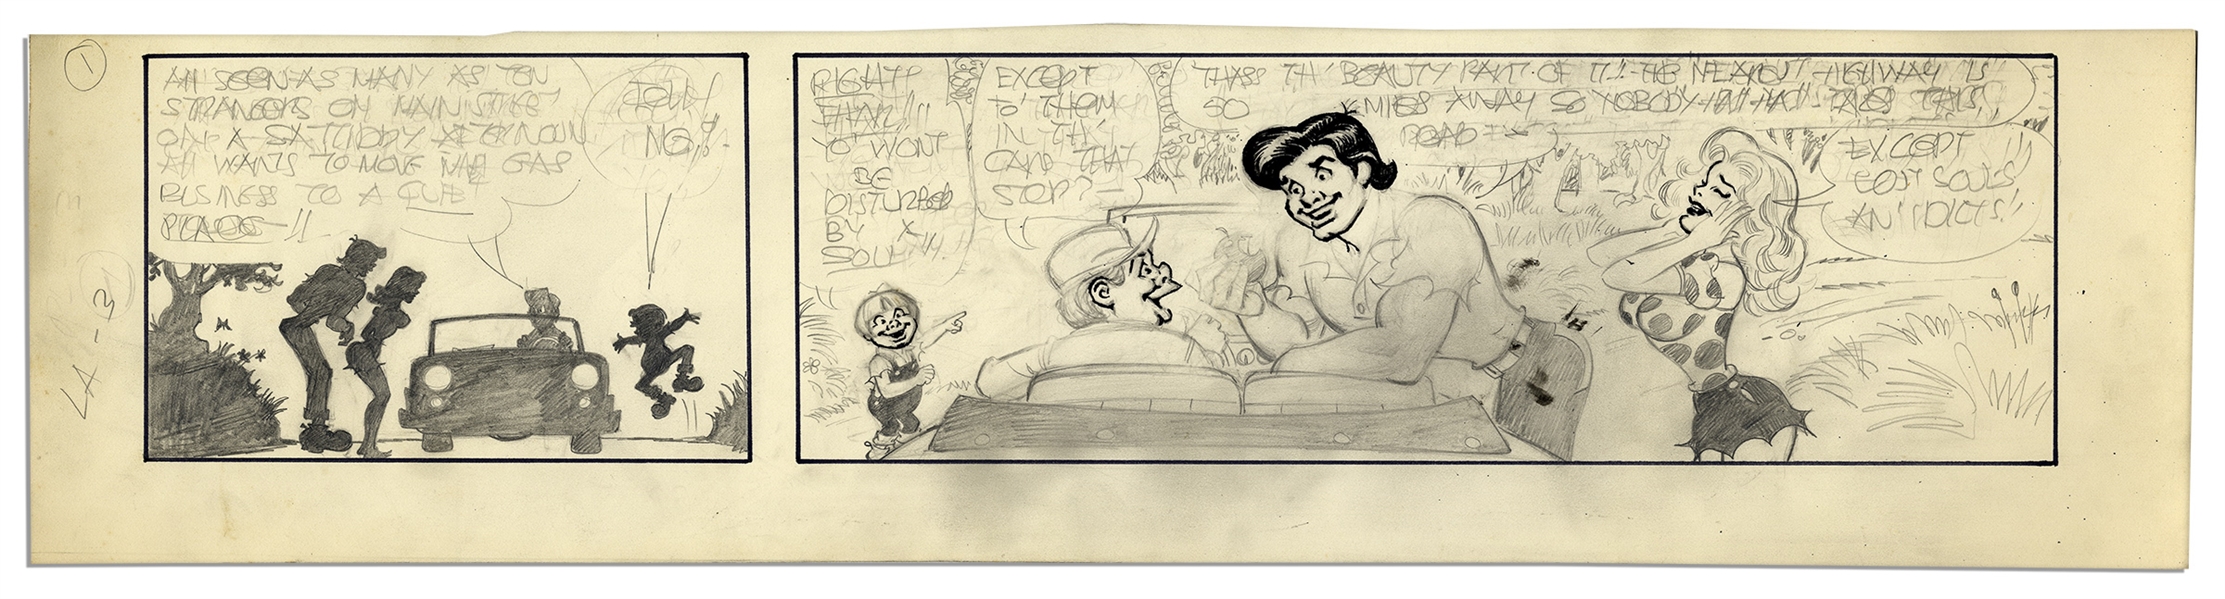 Al Capp ''Li'l Abner'' Unfinished Hand-Drawn Comic Strip -- Featuring Li'l Abner, Daisy Mae & Honest Abe -- Measures 23.25'' x 5.75'' in Pencil & Ink -- Very Good -- From the Al Capp Estate